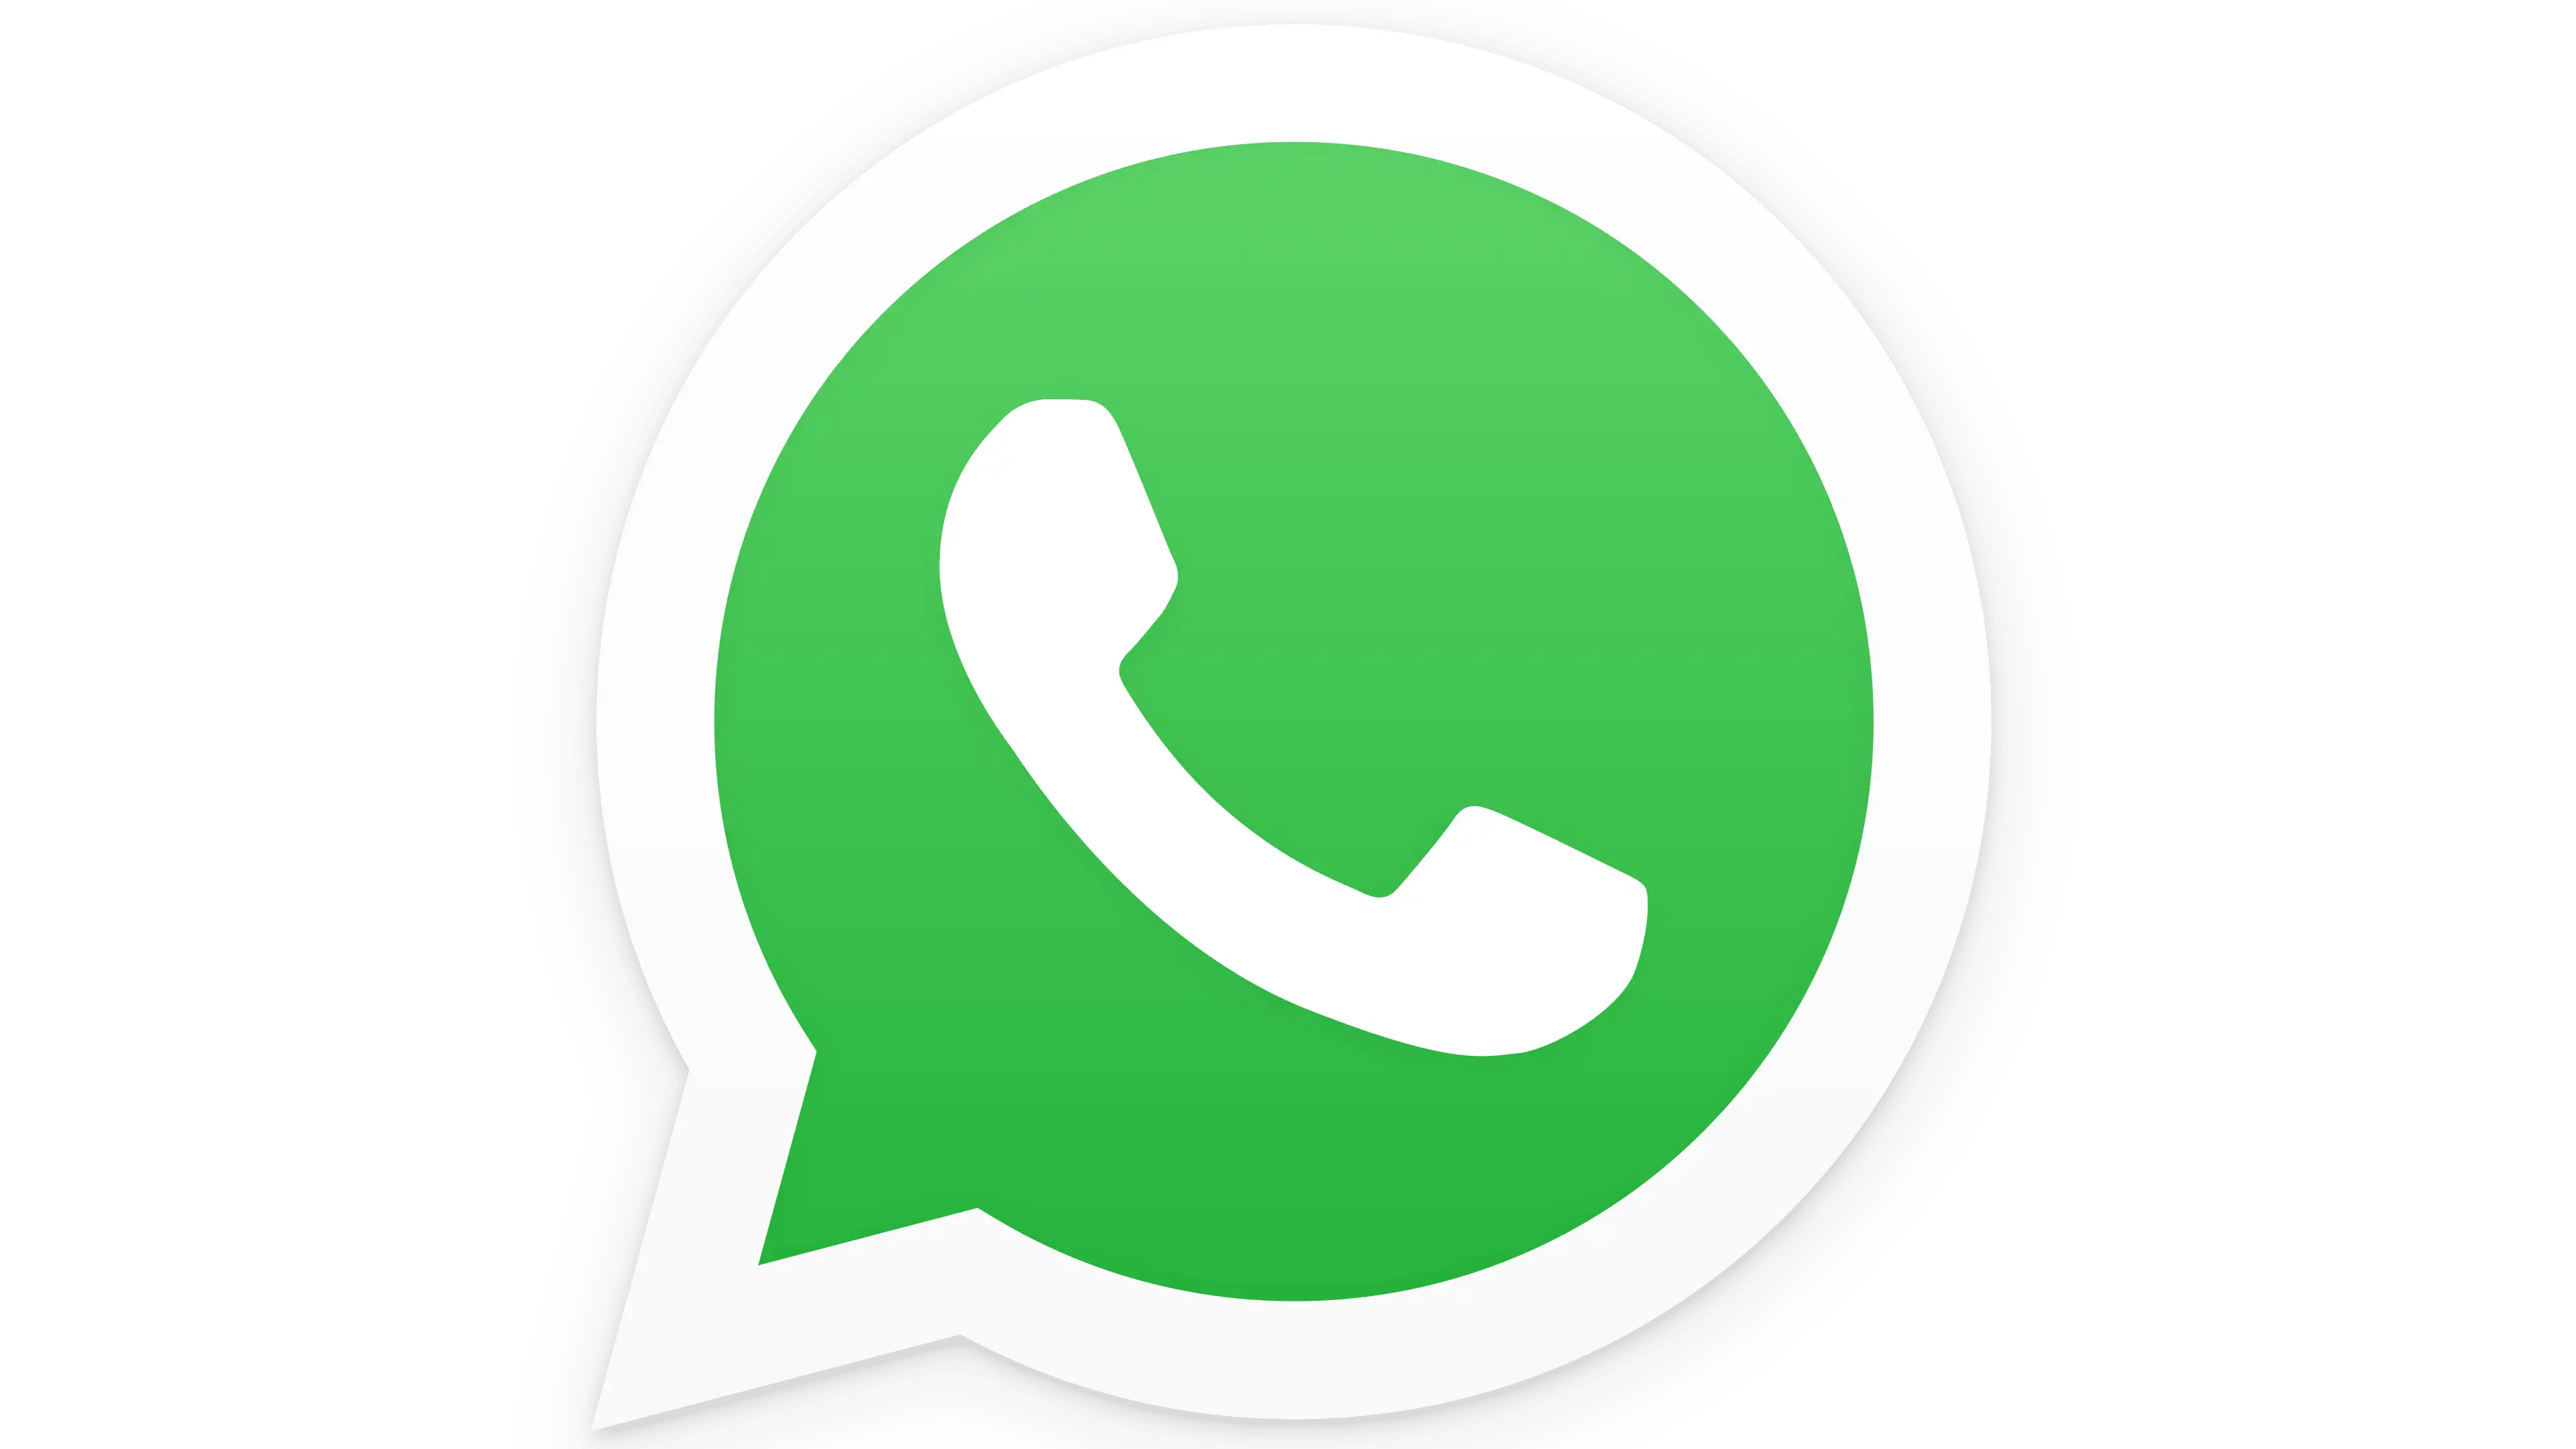 WhatsApp beta on Windows now supports audio and video calls with up to 32 people